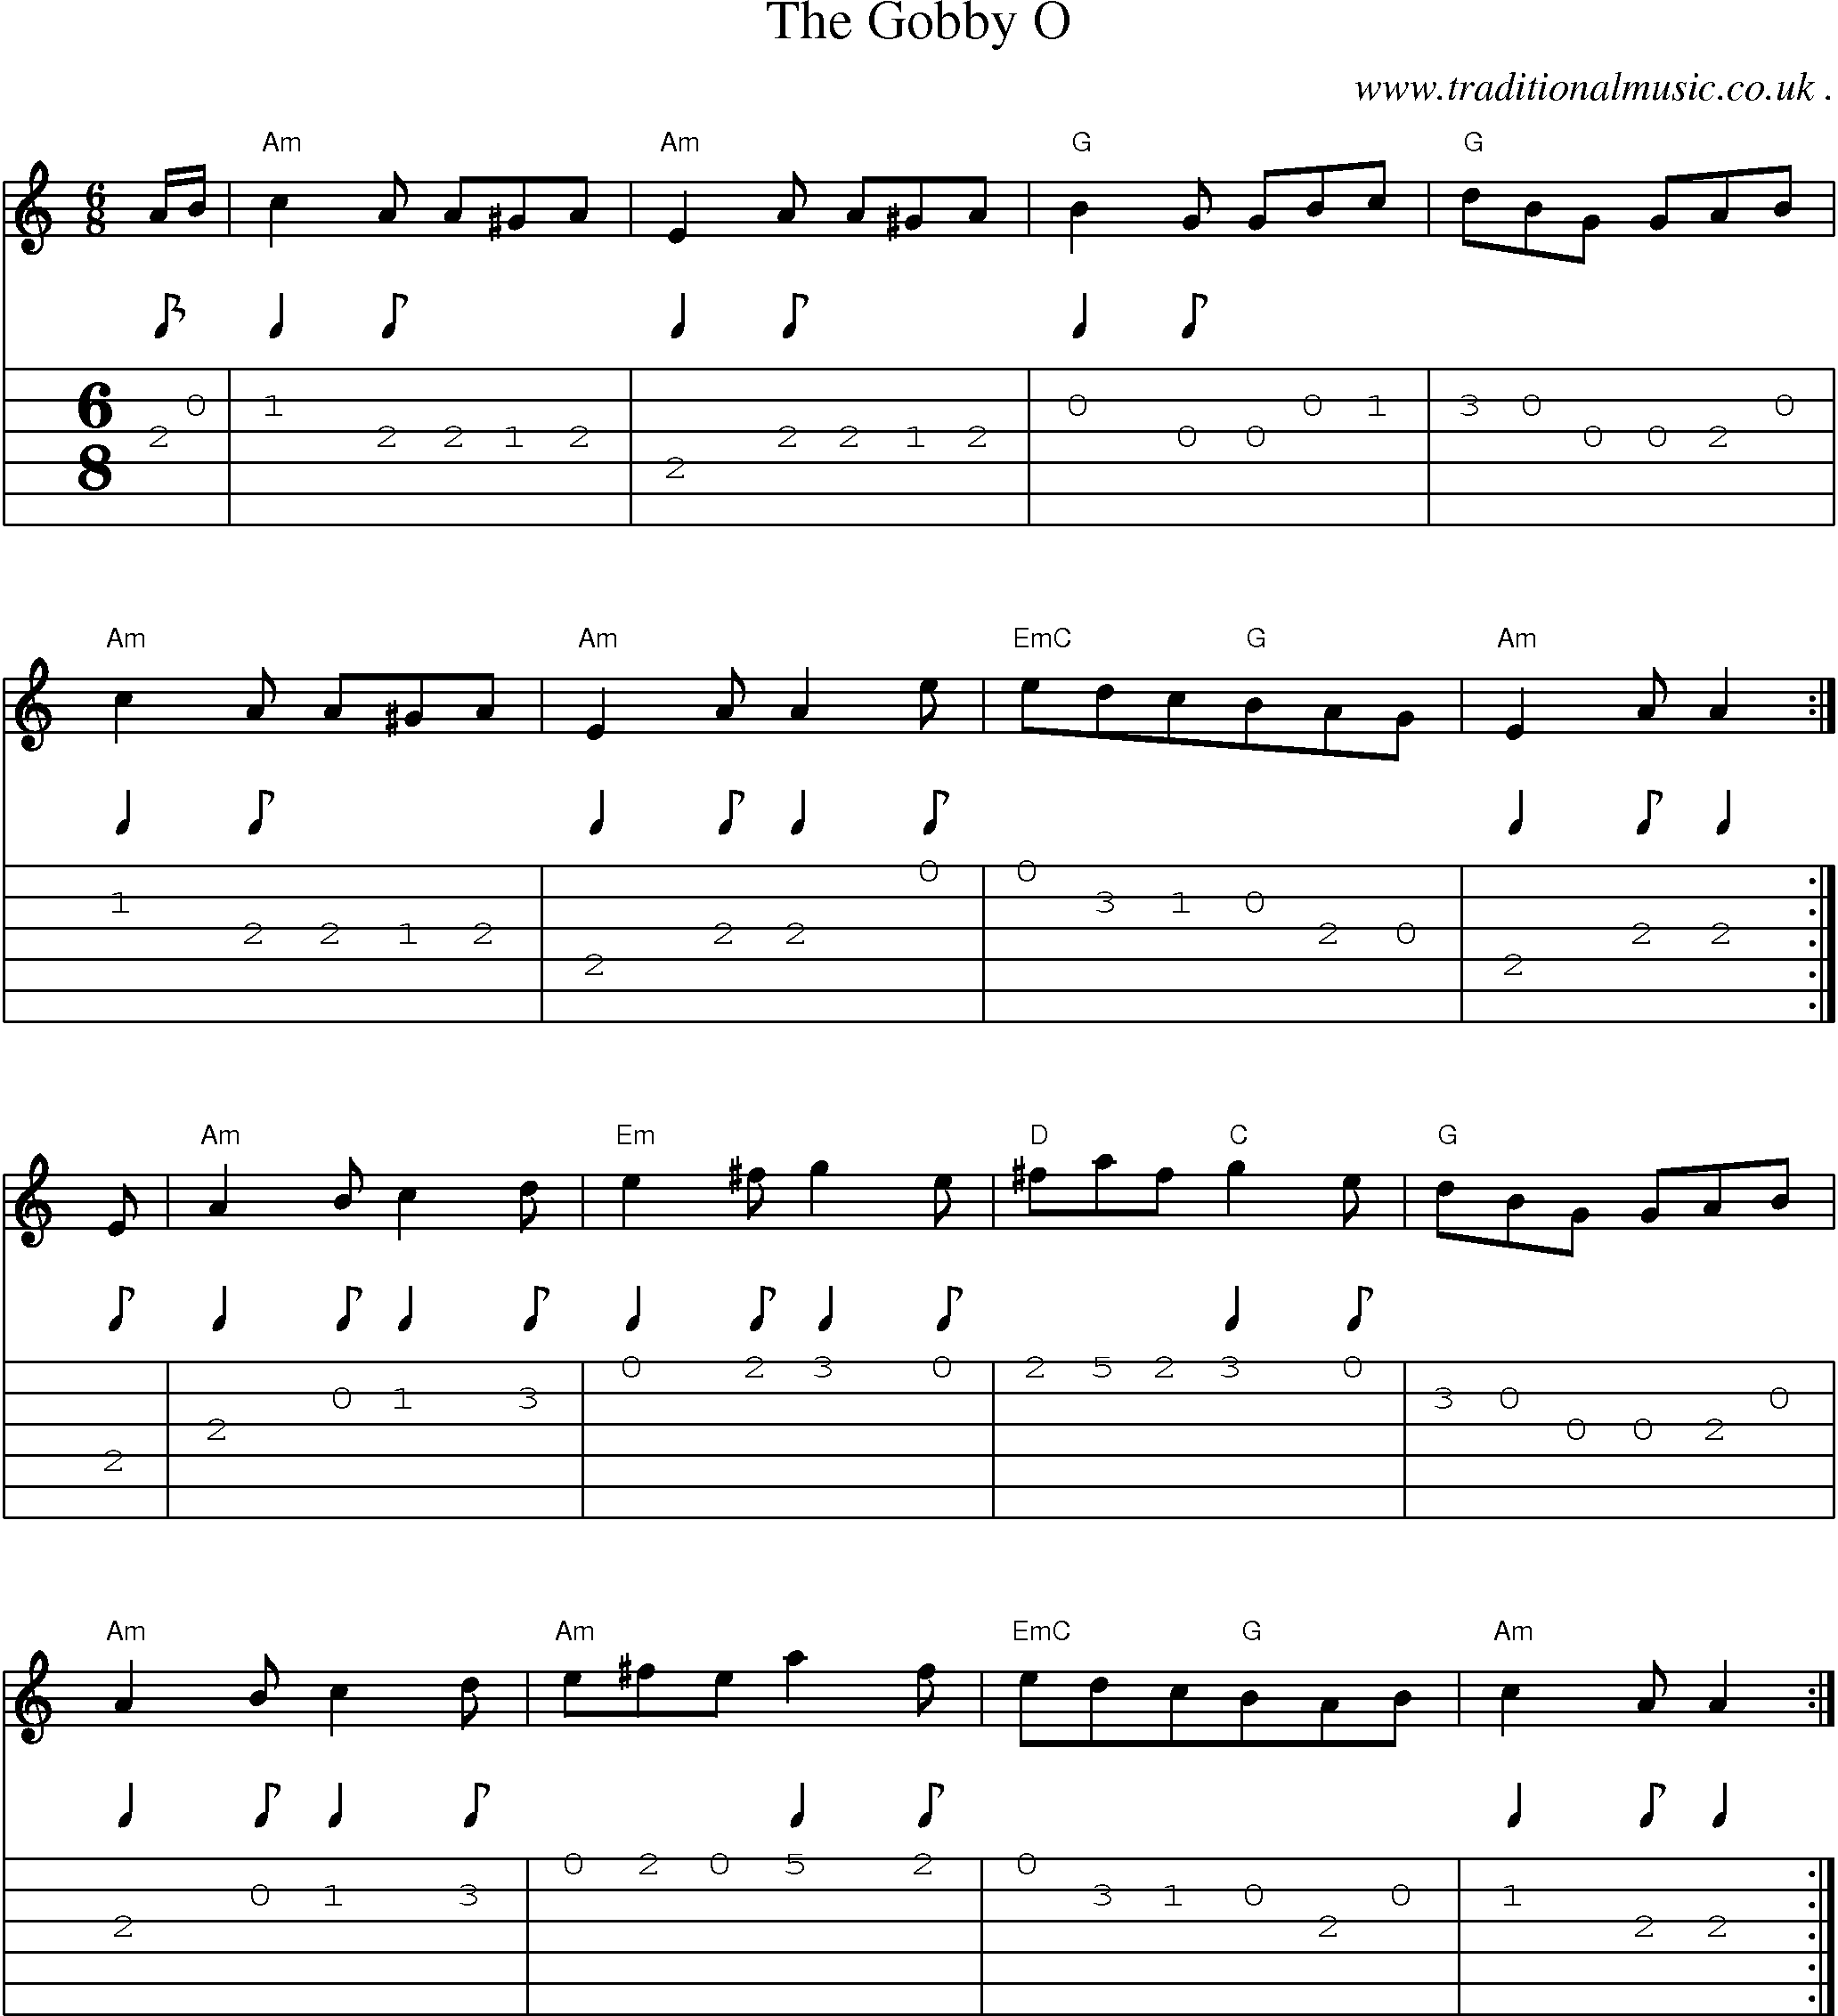 Sheet-Music and Guitar Tabs for The Gobby O